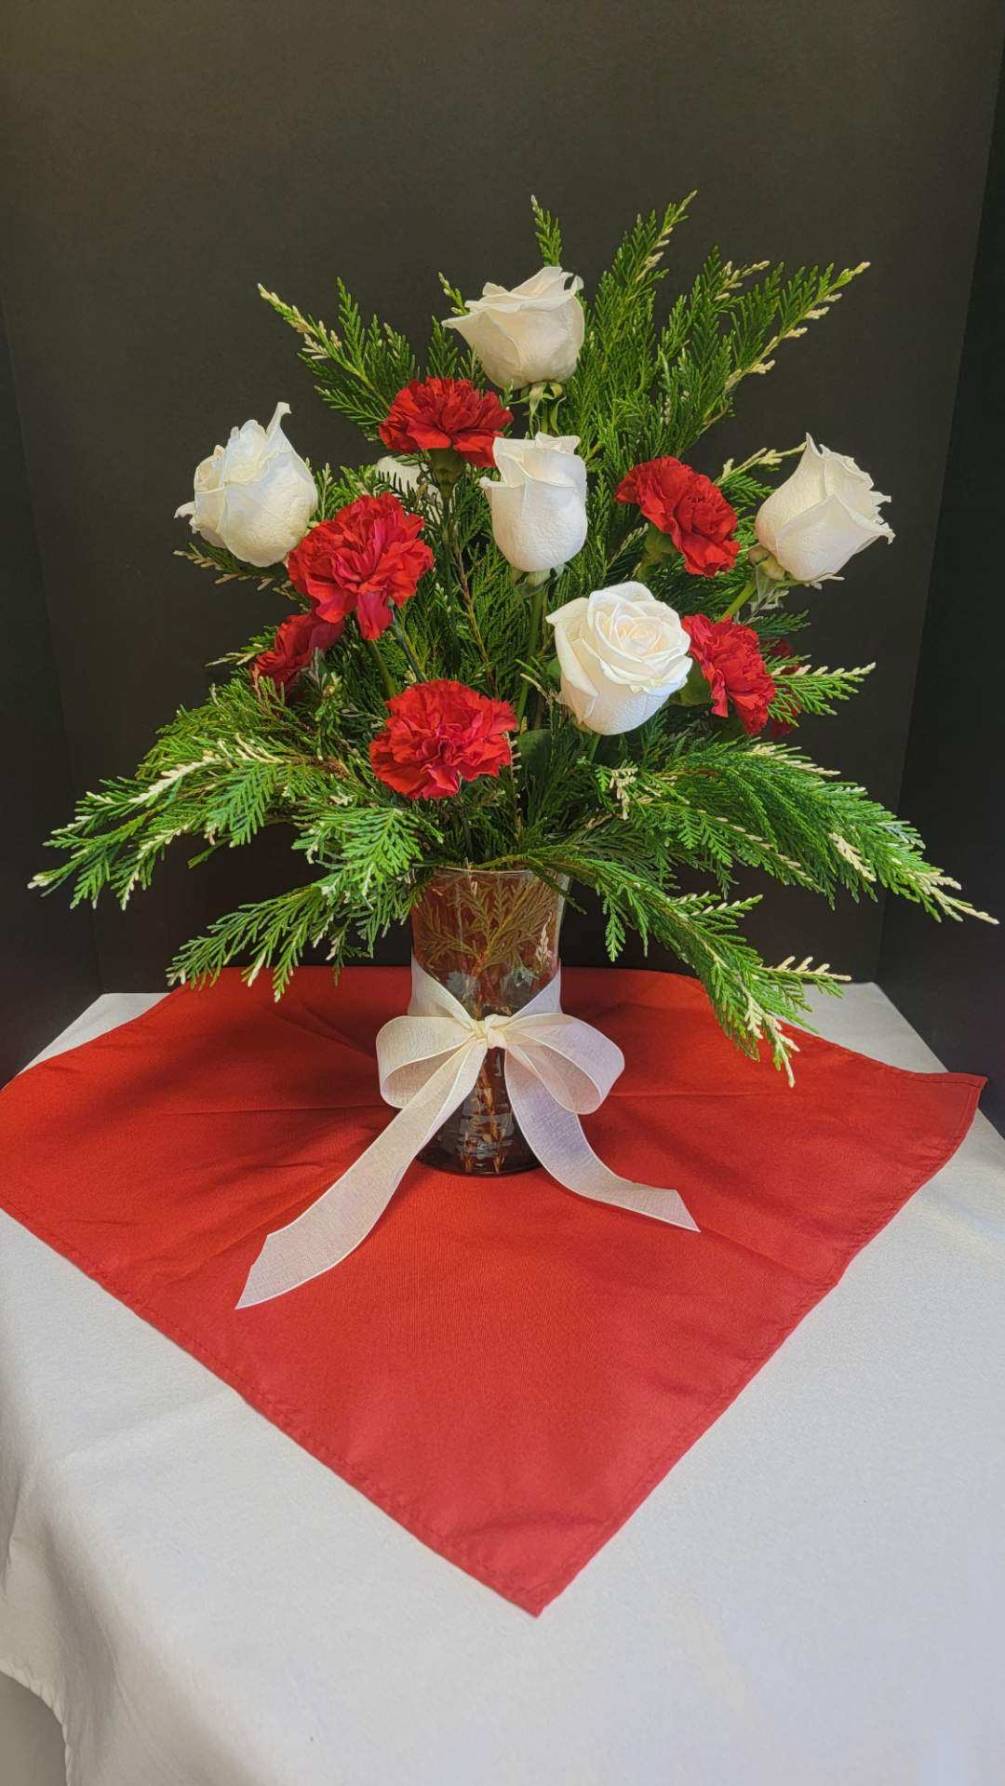 bakers dozen of flowers- mix or white roses and red carnations with